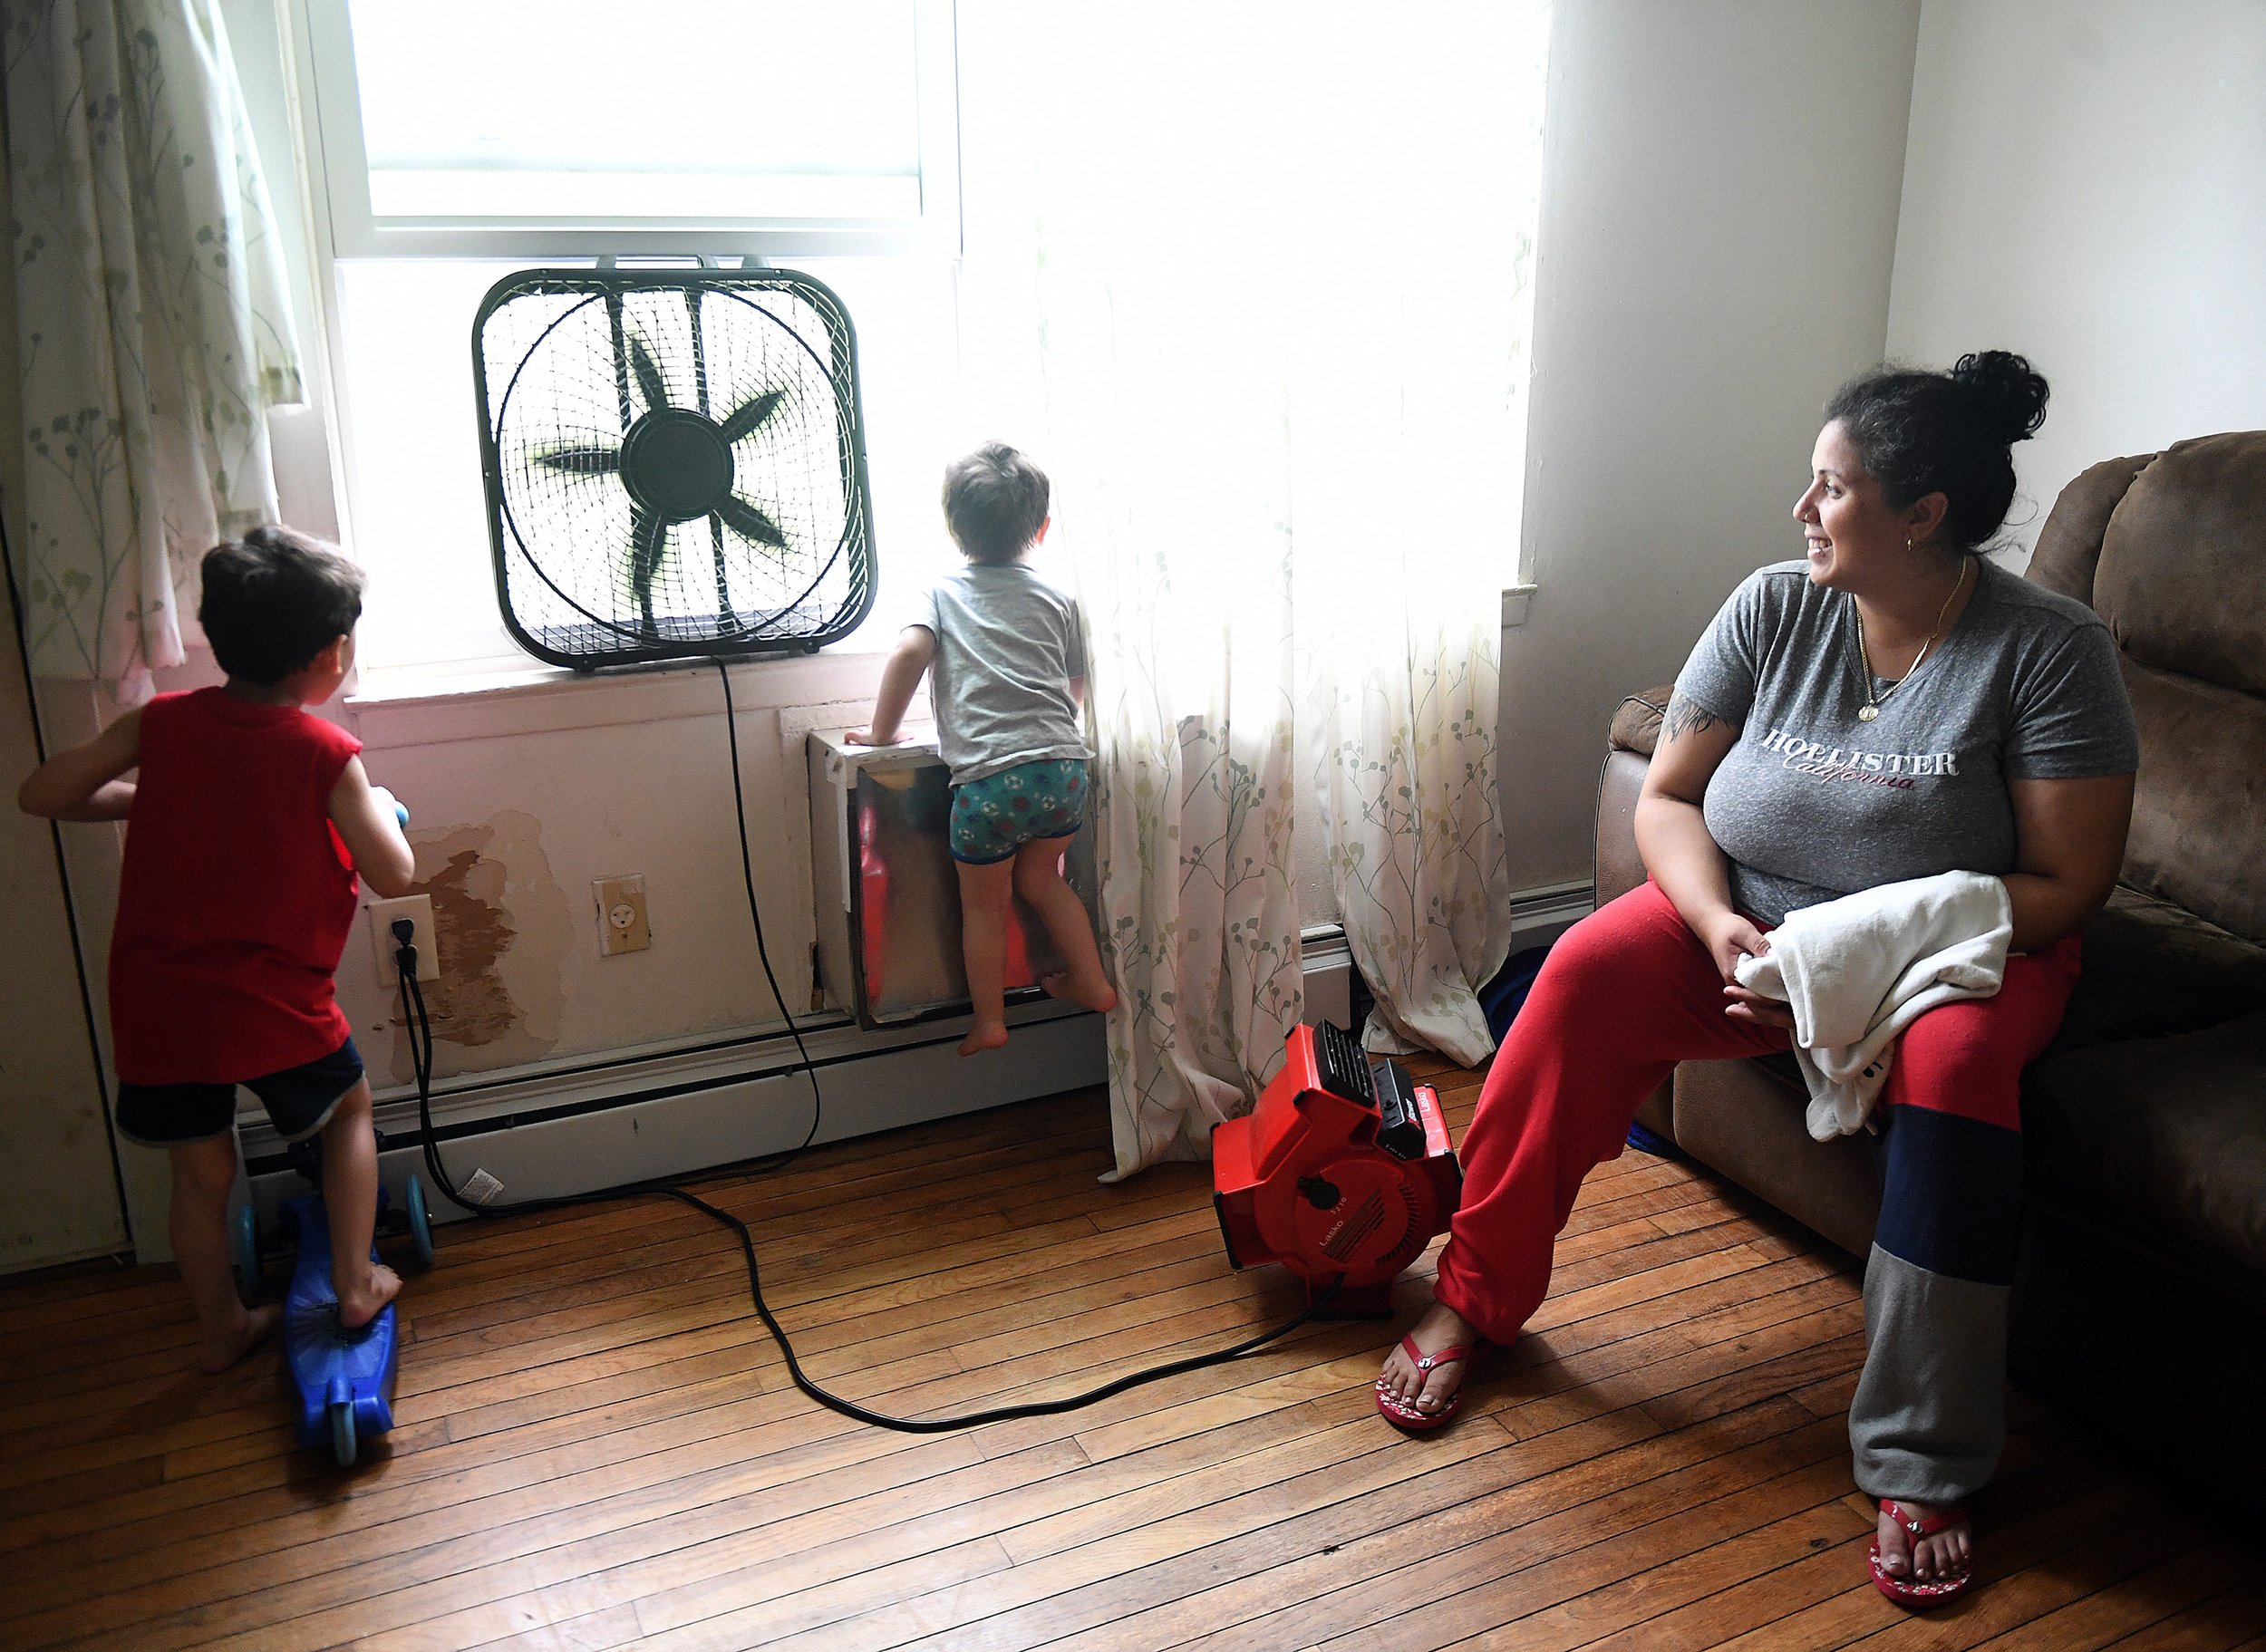  Christine Santos looks on as her sons watch out the window of their Branford Manor home in Groton Friday, June 17, 2022. She said she feels stuck at Branford and doesn’t see many other affordable housing opportunities in the area. (Sarah Gordon / Th